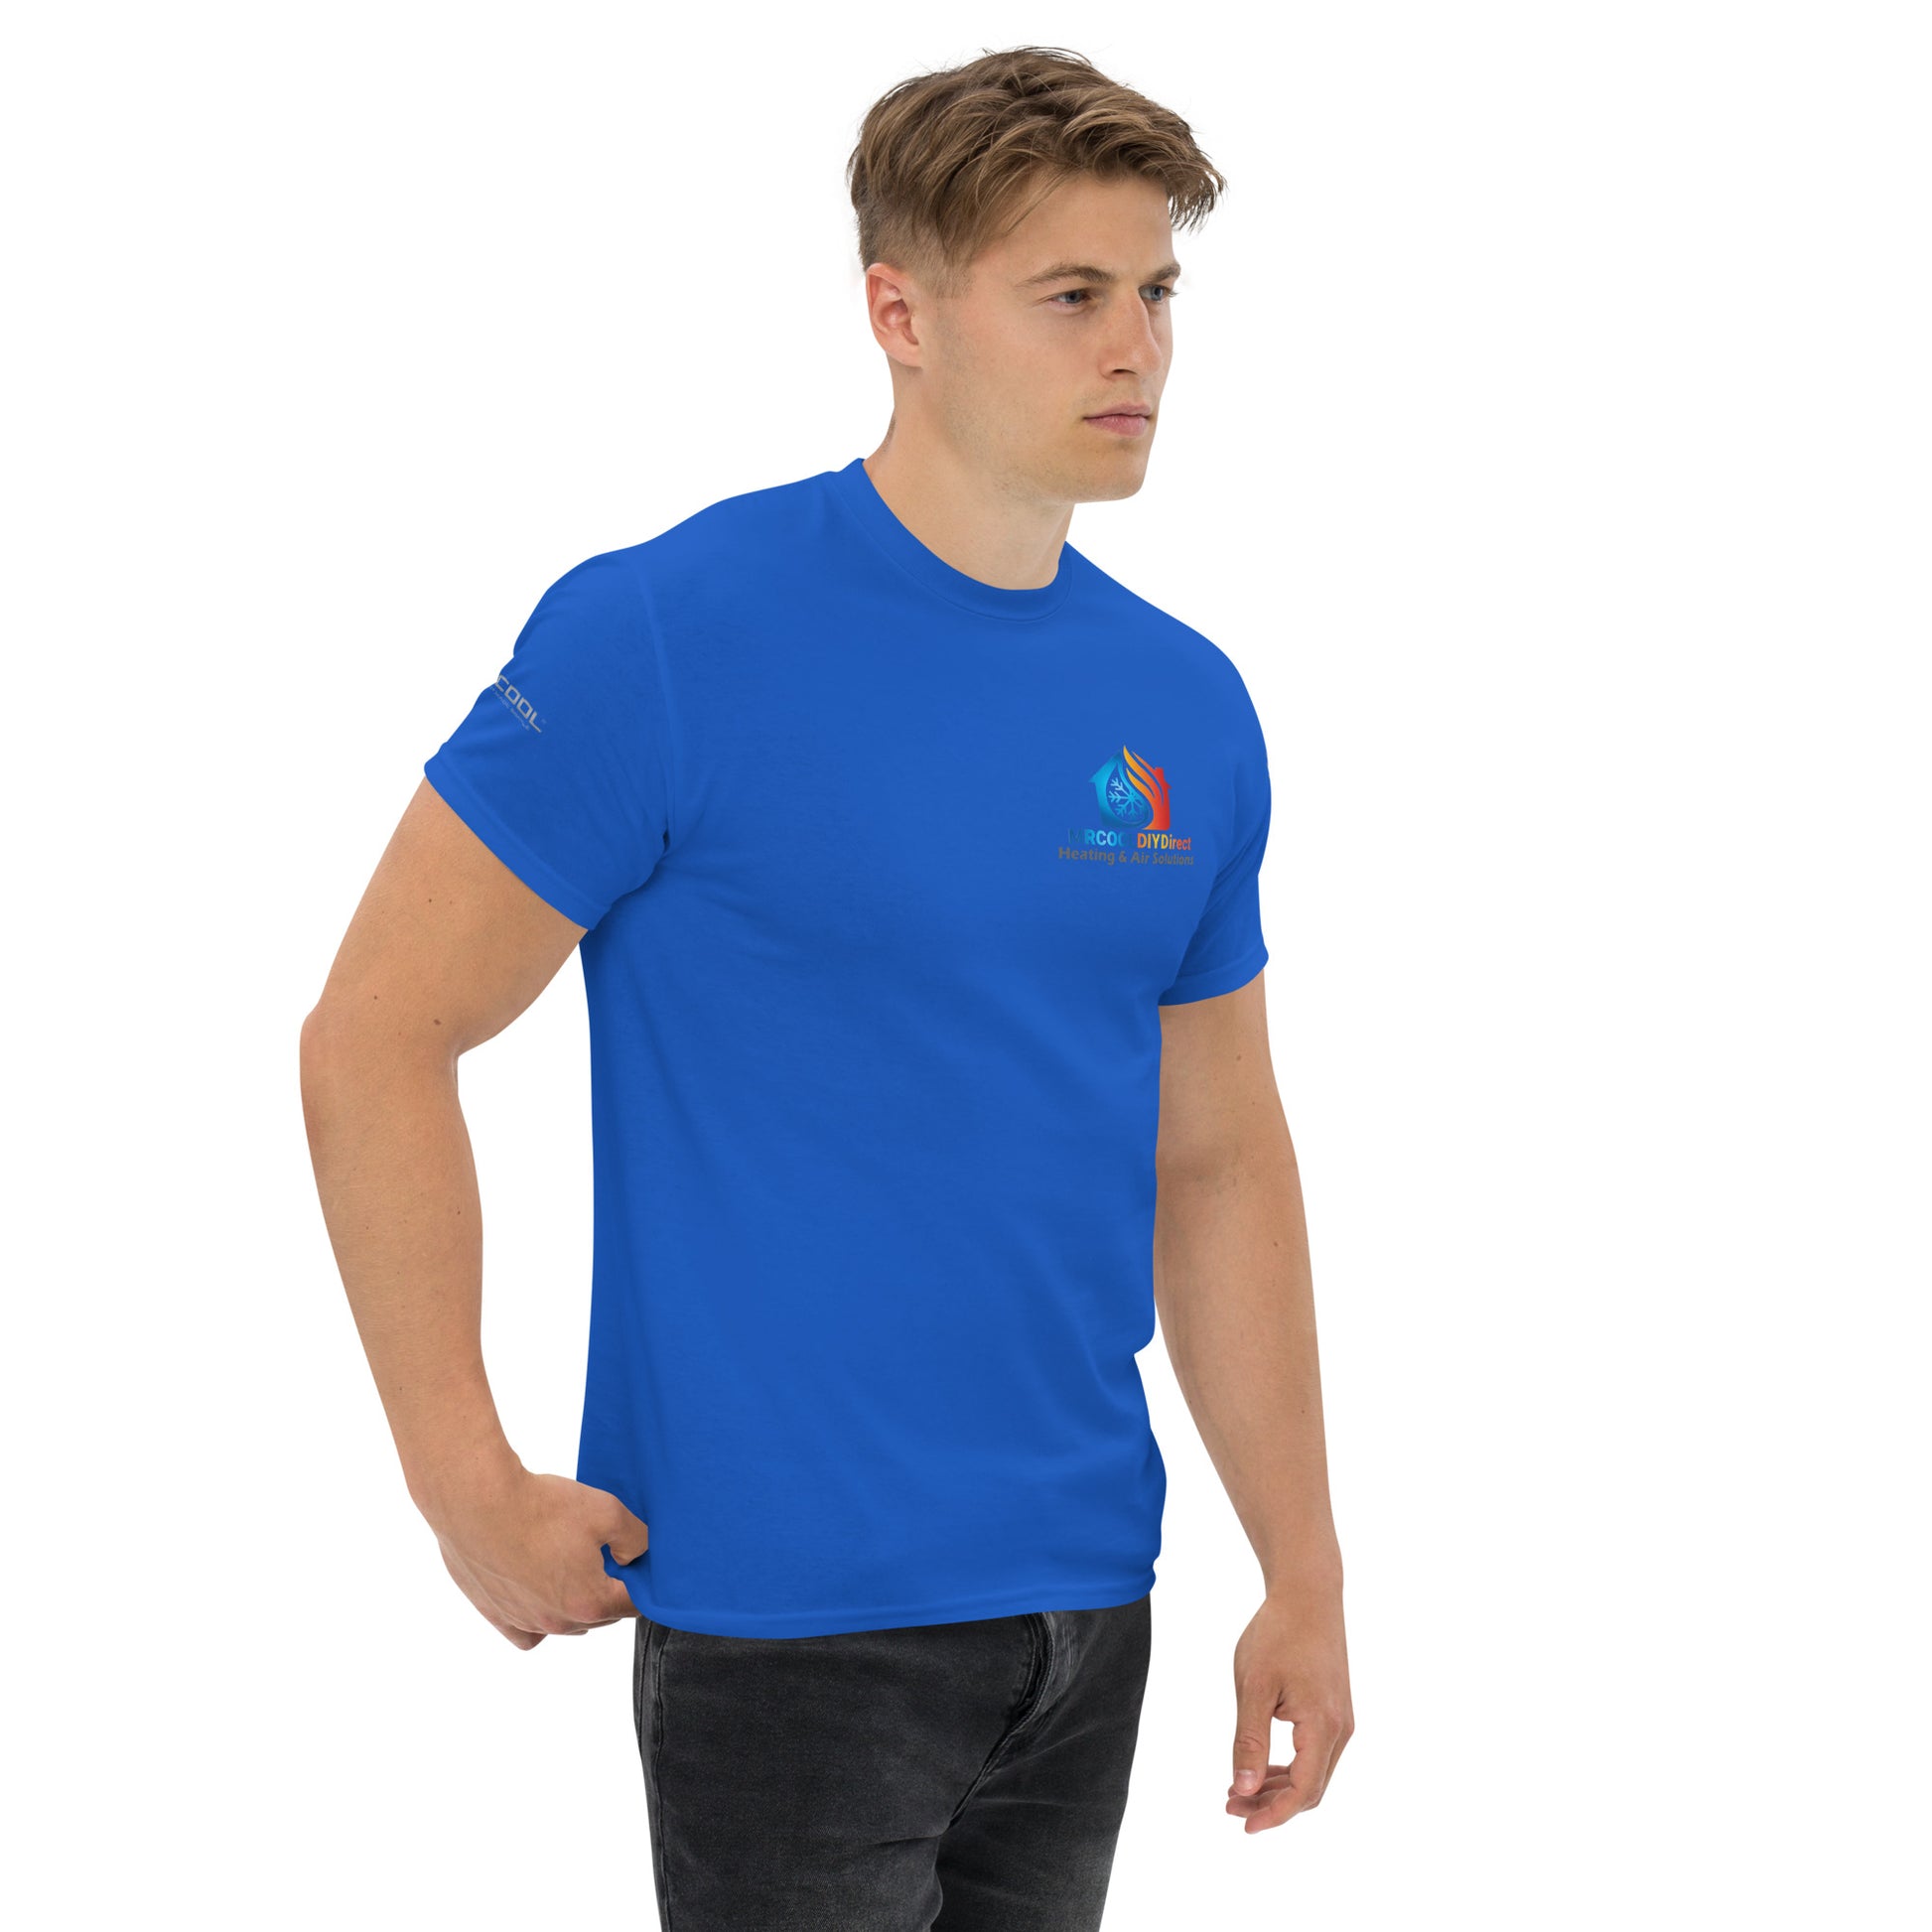 A young man wearing an Exclusive HVAC-Themed custom-designed royal blue t-shirt by MRCOOL DIY Direct with a colorful logo on the left chest stands against a white background, looking to his right.